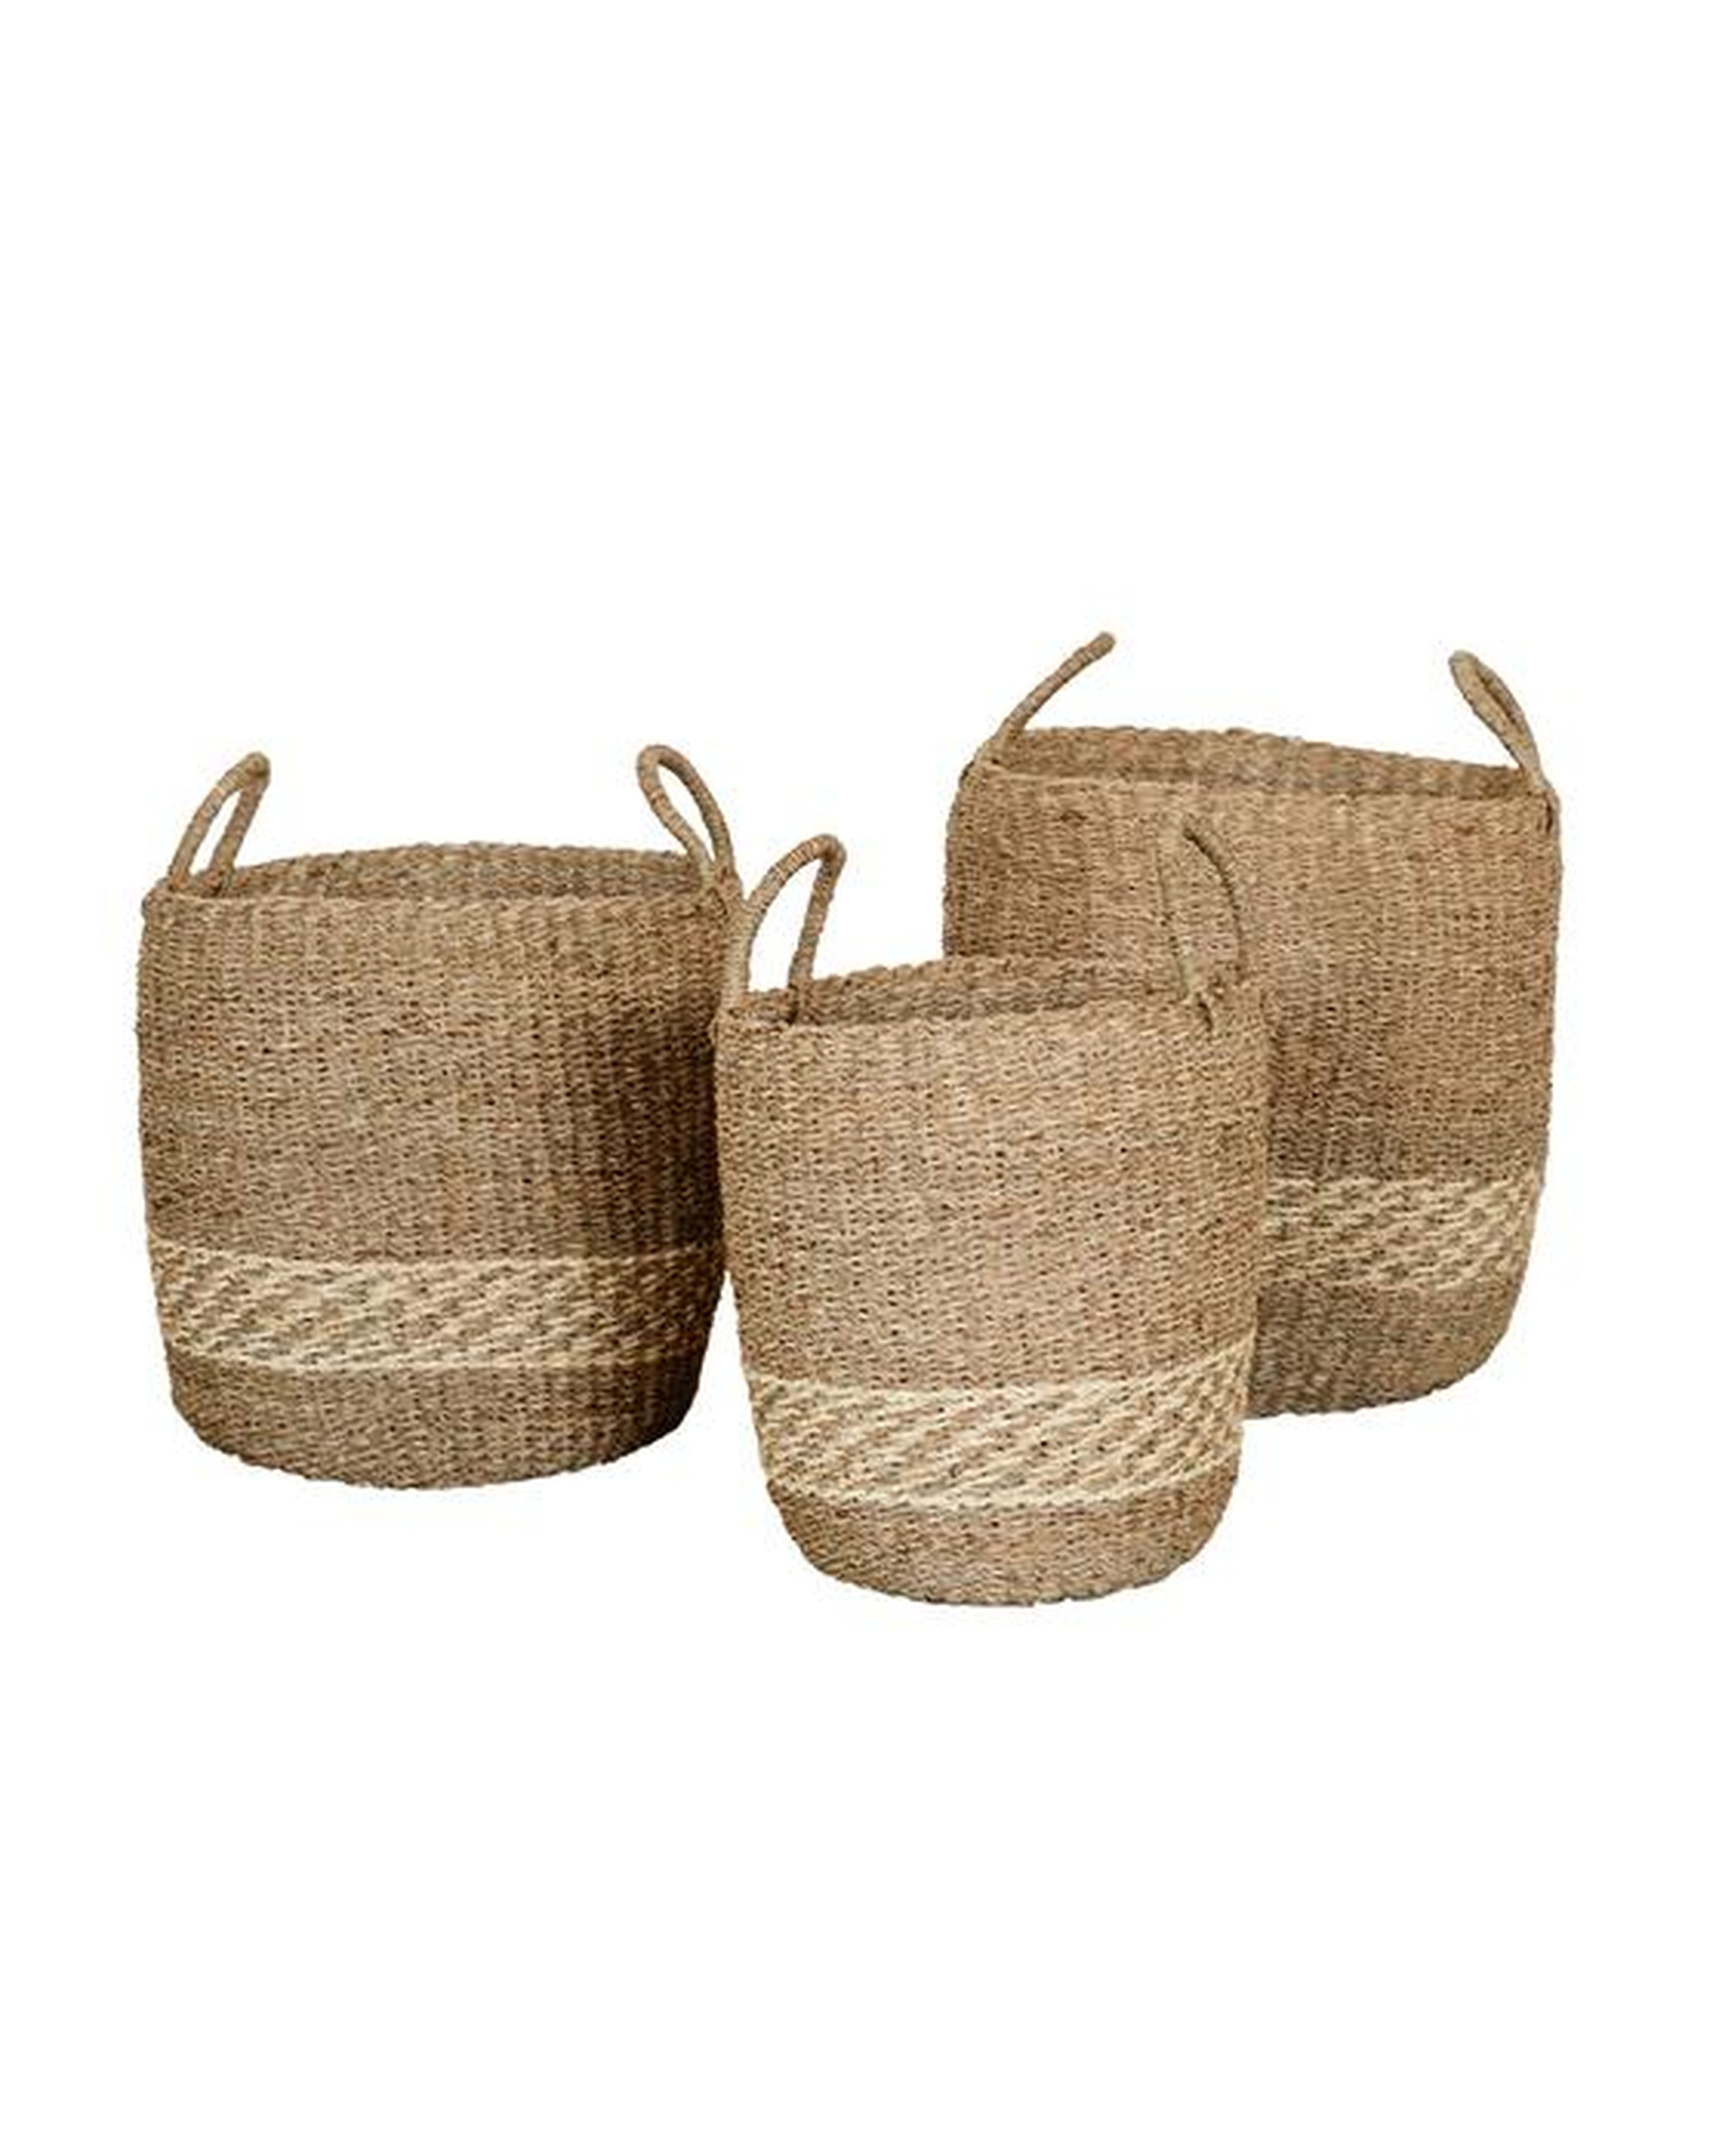 Haines Basket (Set of 3) - McGee & Co.